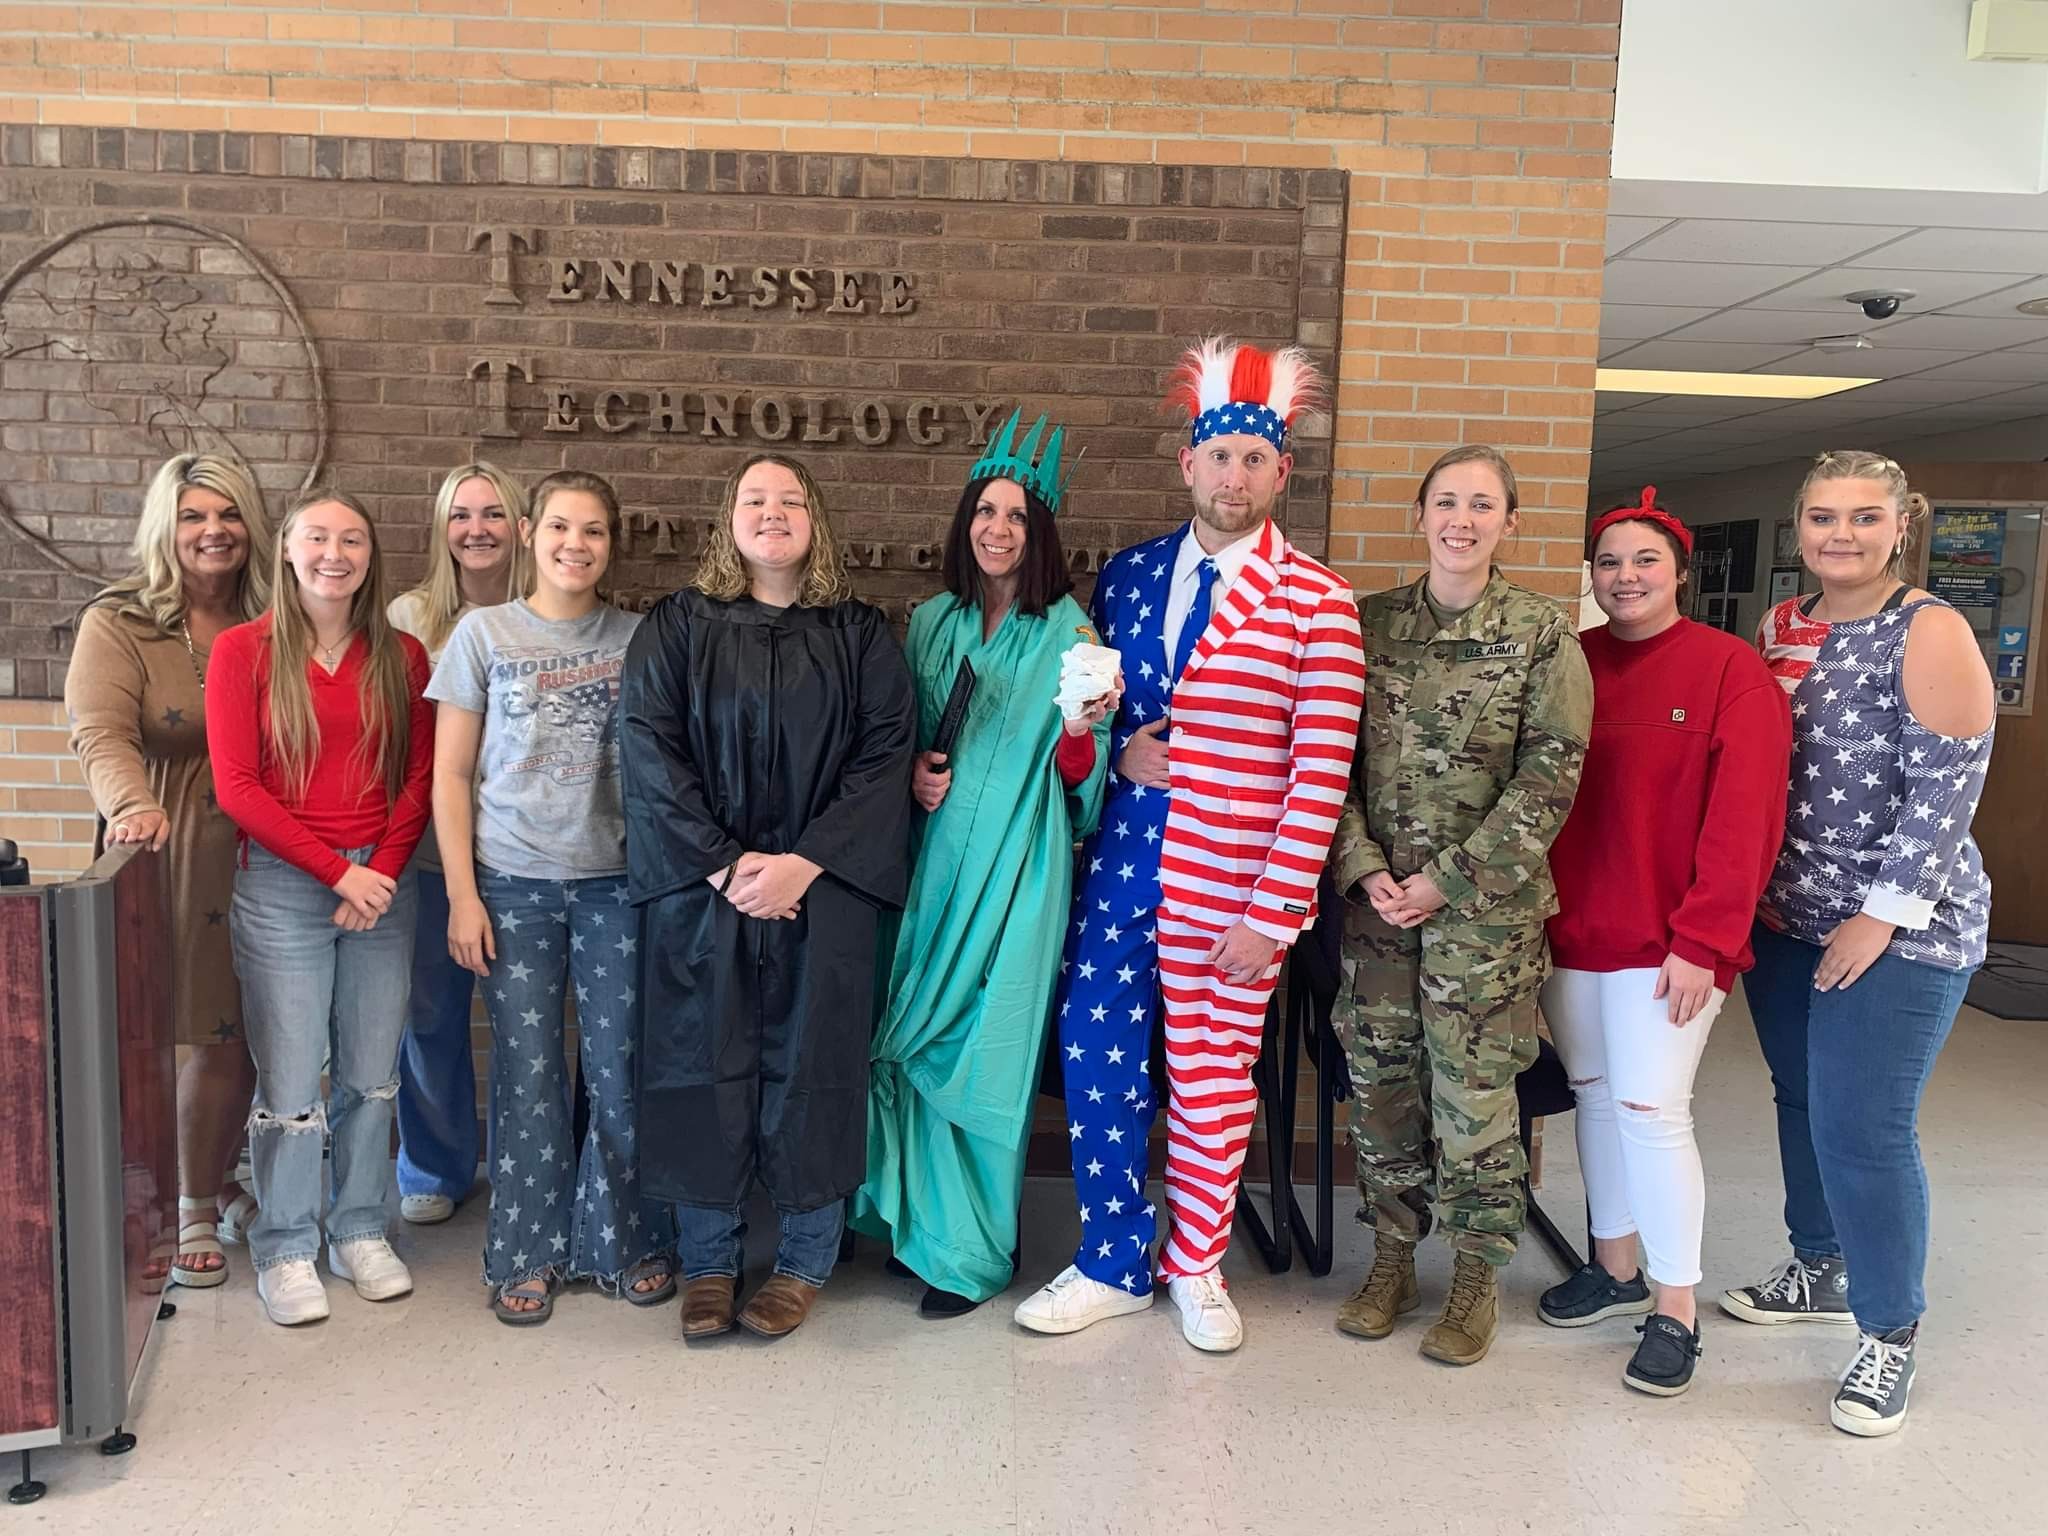 Surgical technology students celebrating Constitution Day 2022